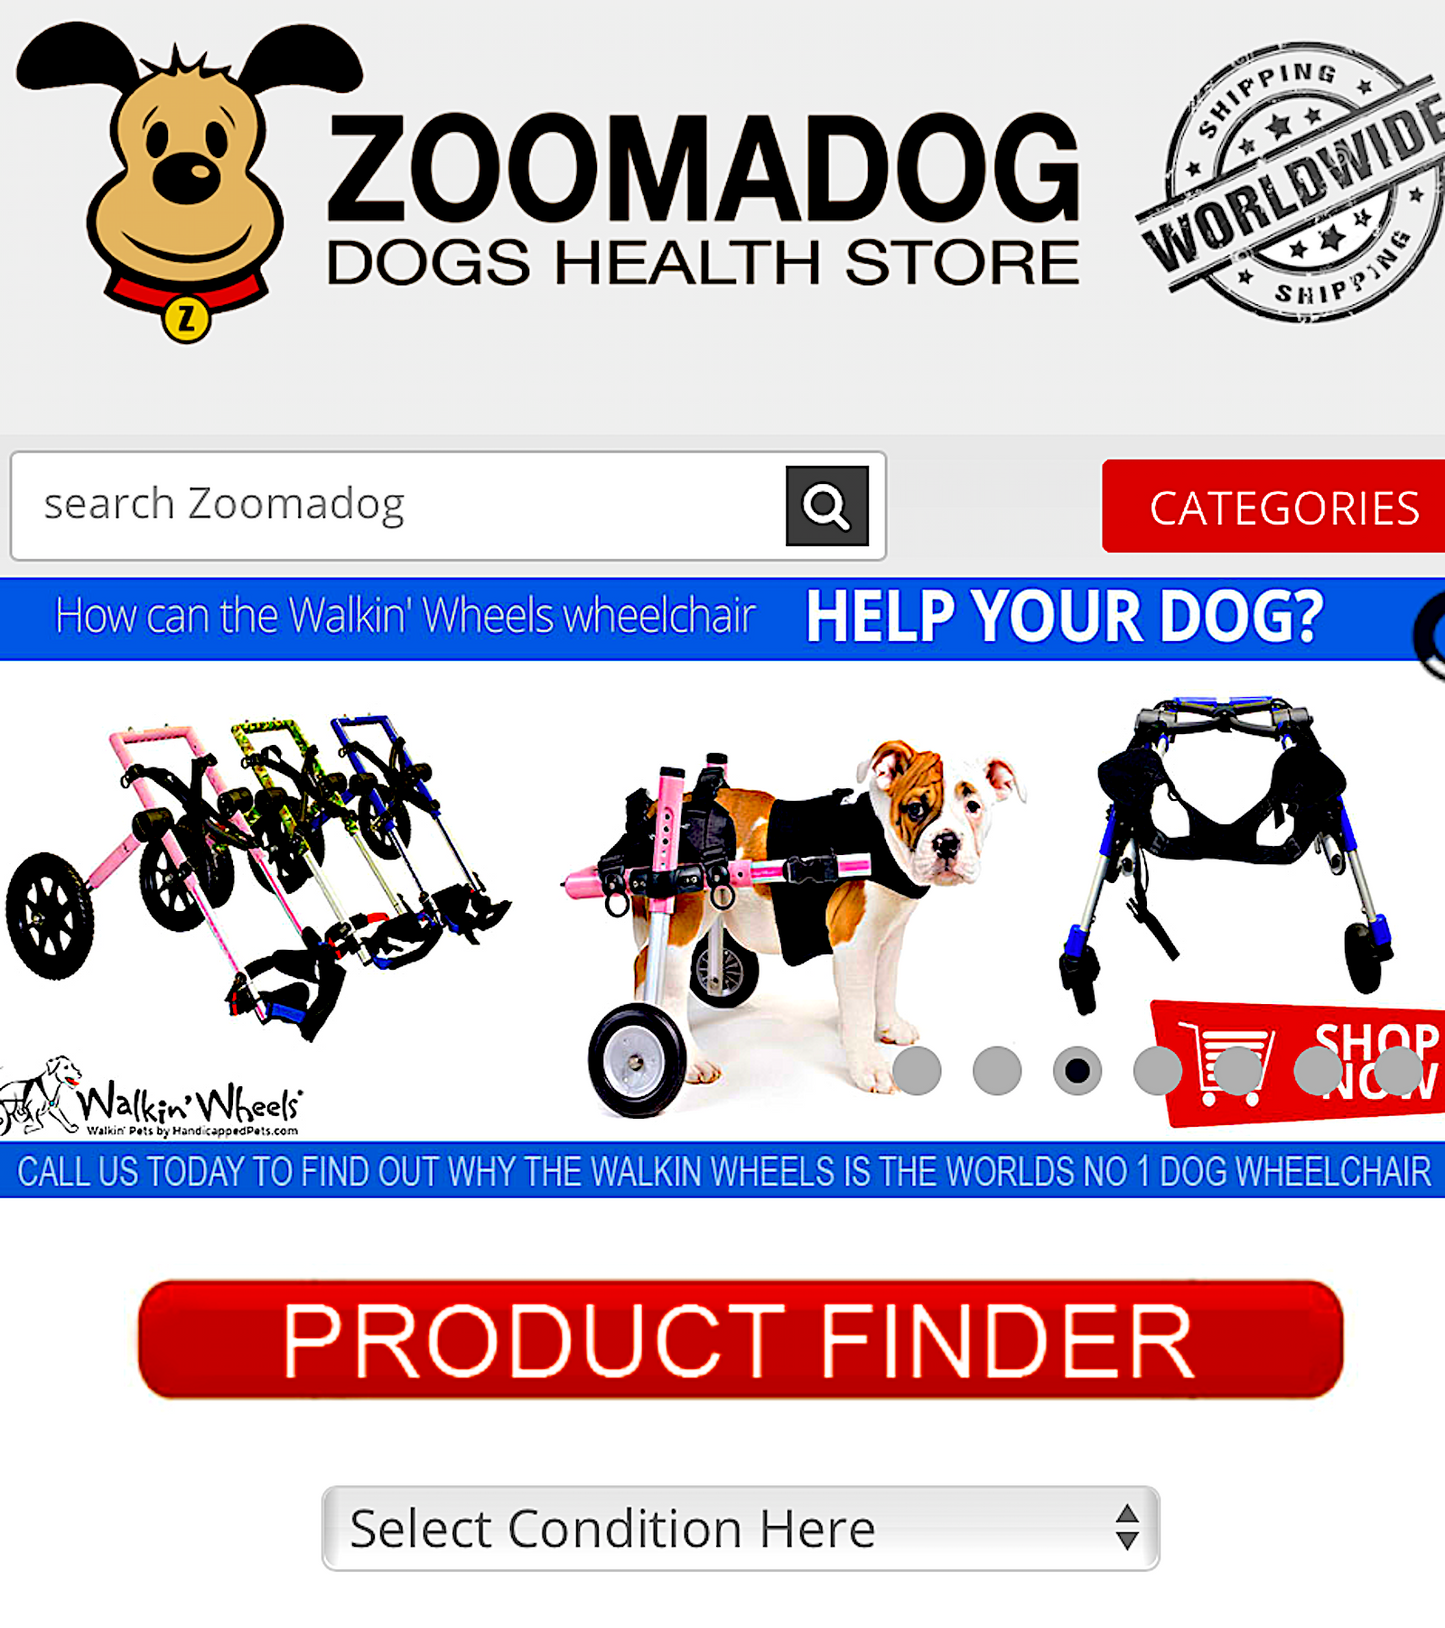 ZOOMADOG-UK: braces, harnesses, wheelchairs and more for canine rehabilitation - Vital Vet